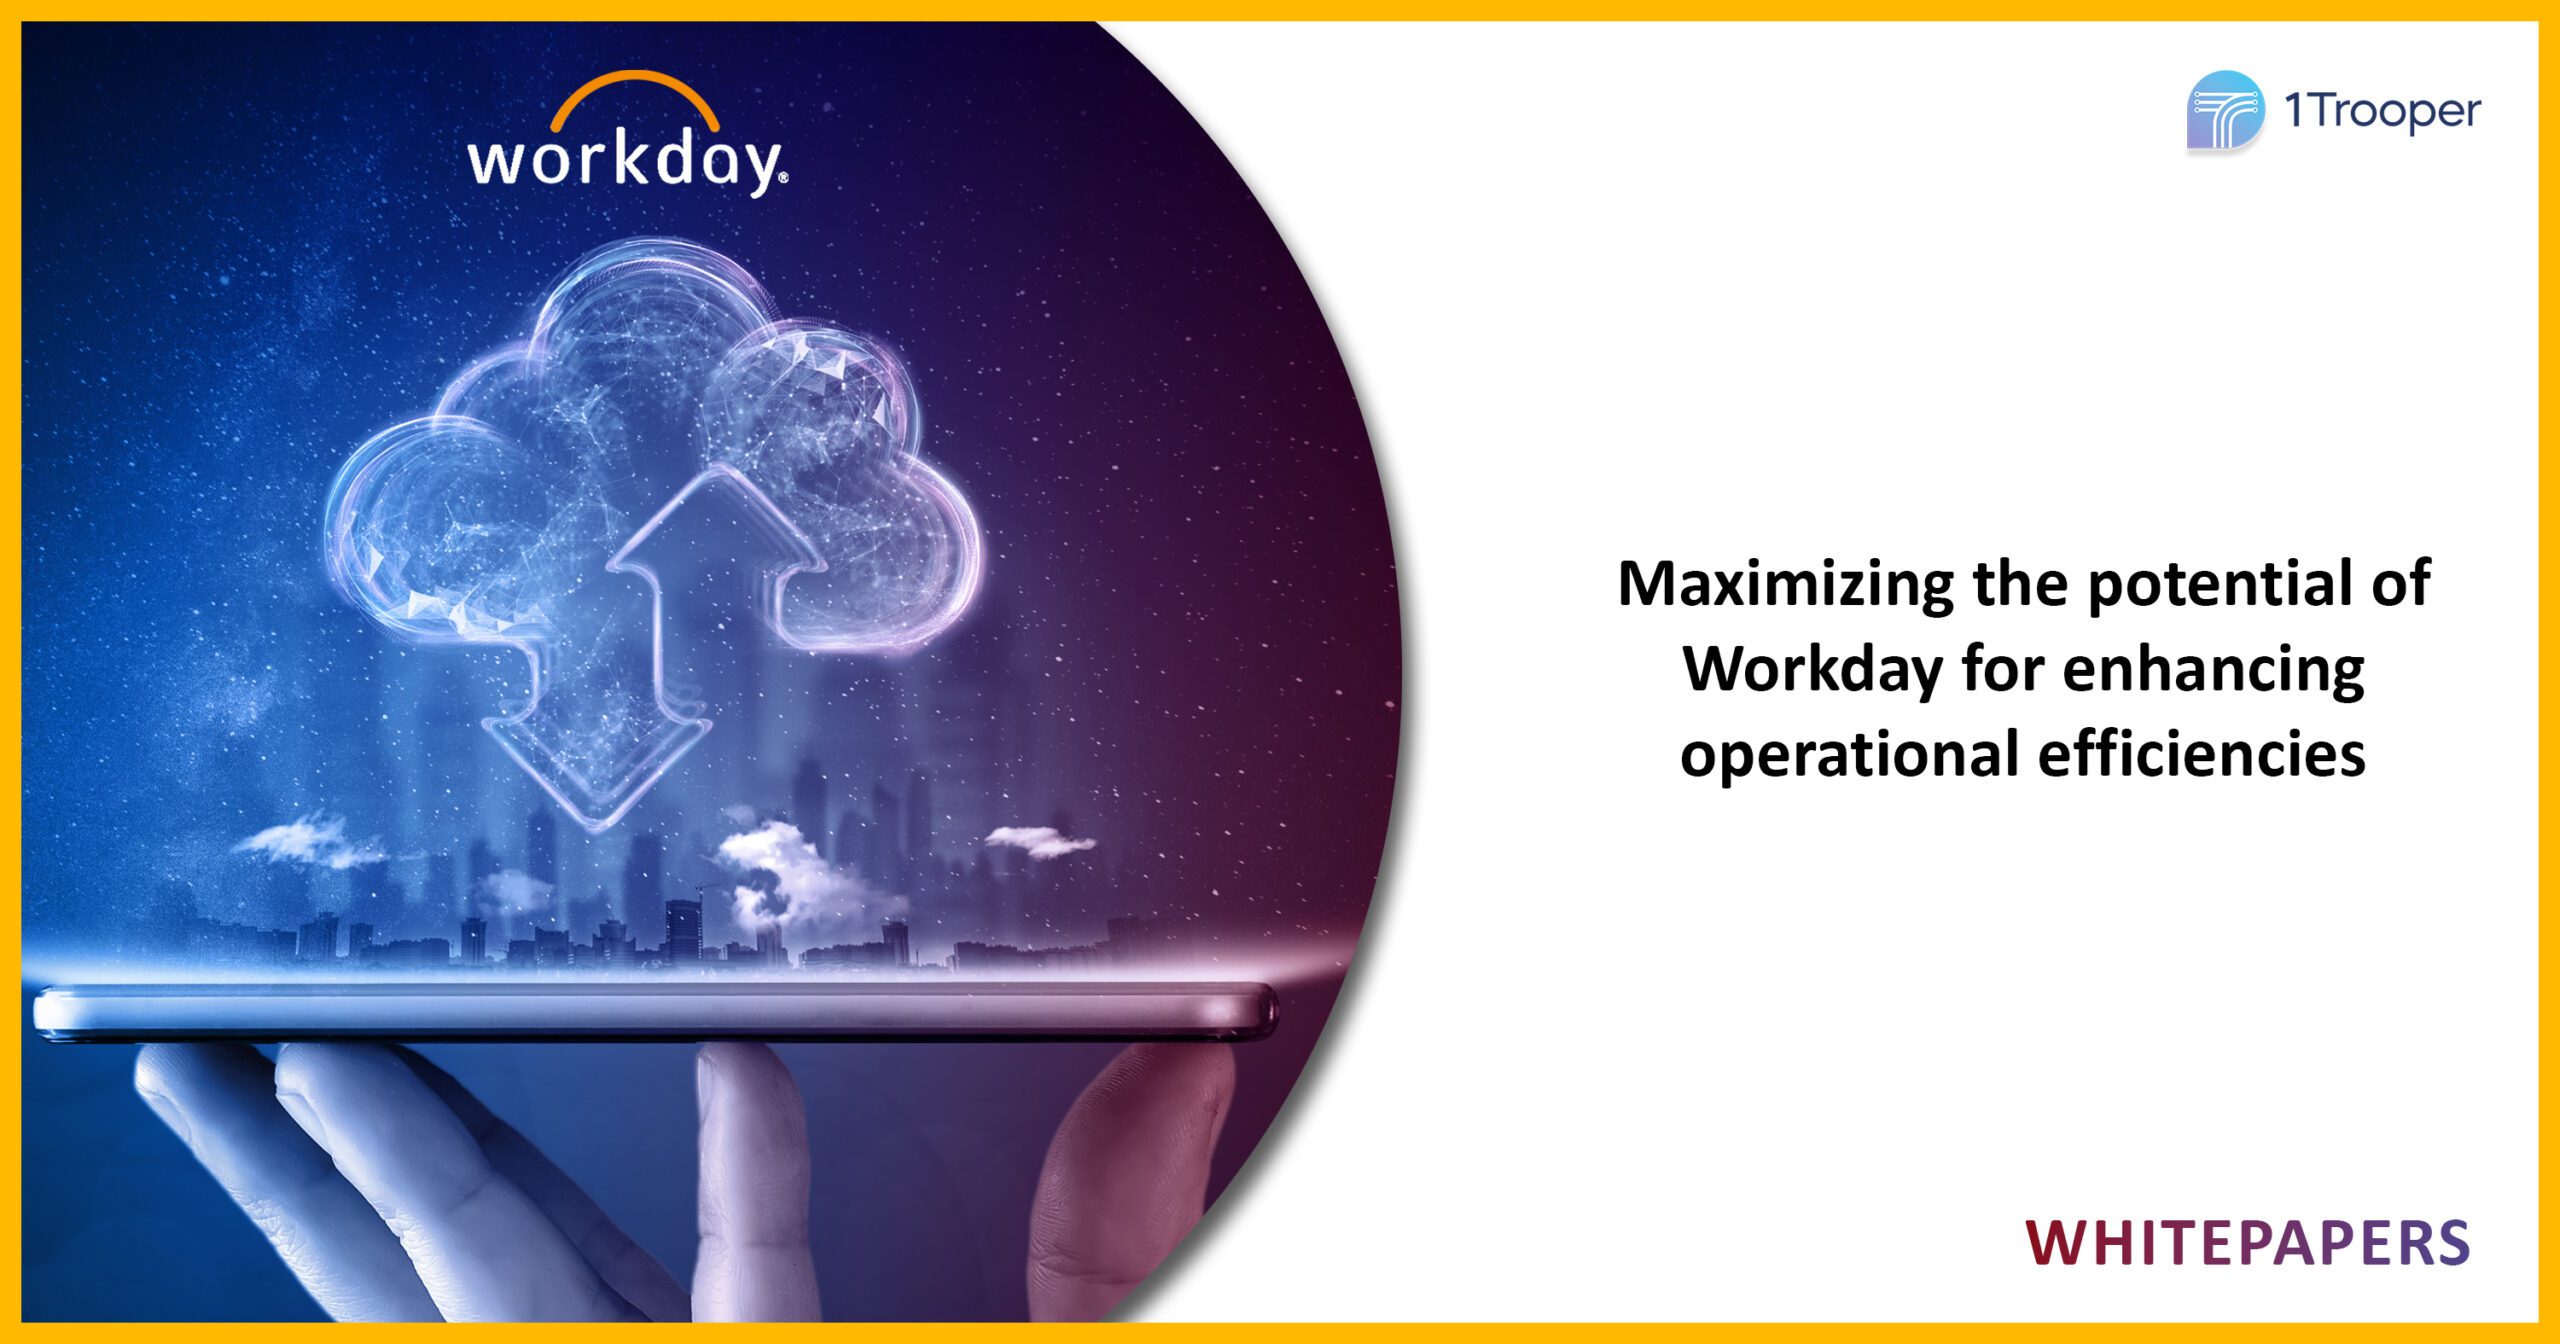 Maximizing the Potential of Workday for Enhancing Operational Efficiencies